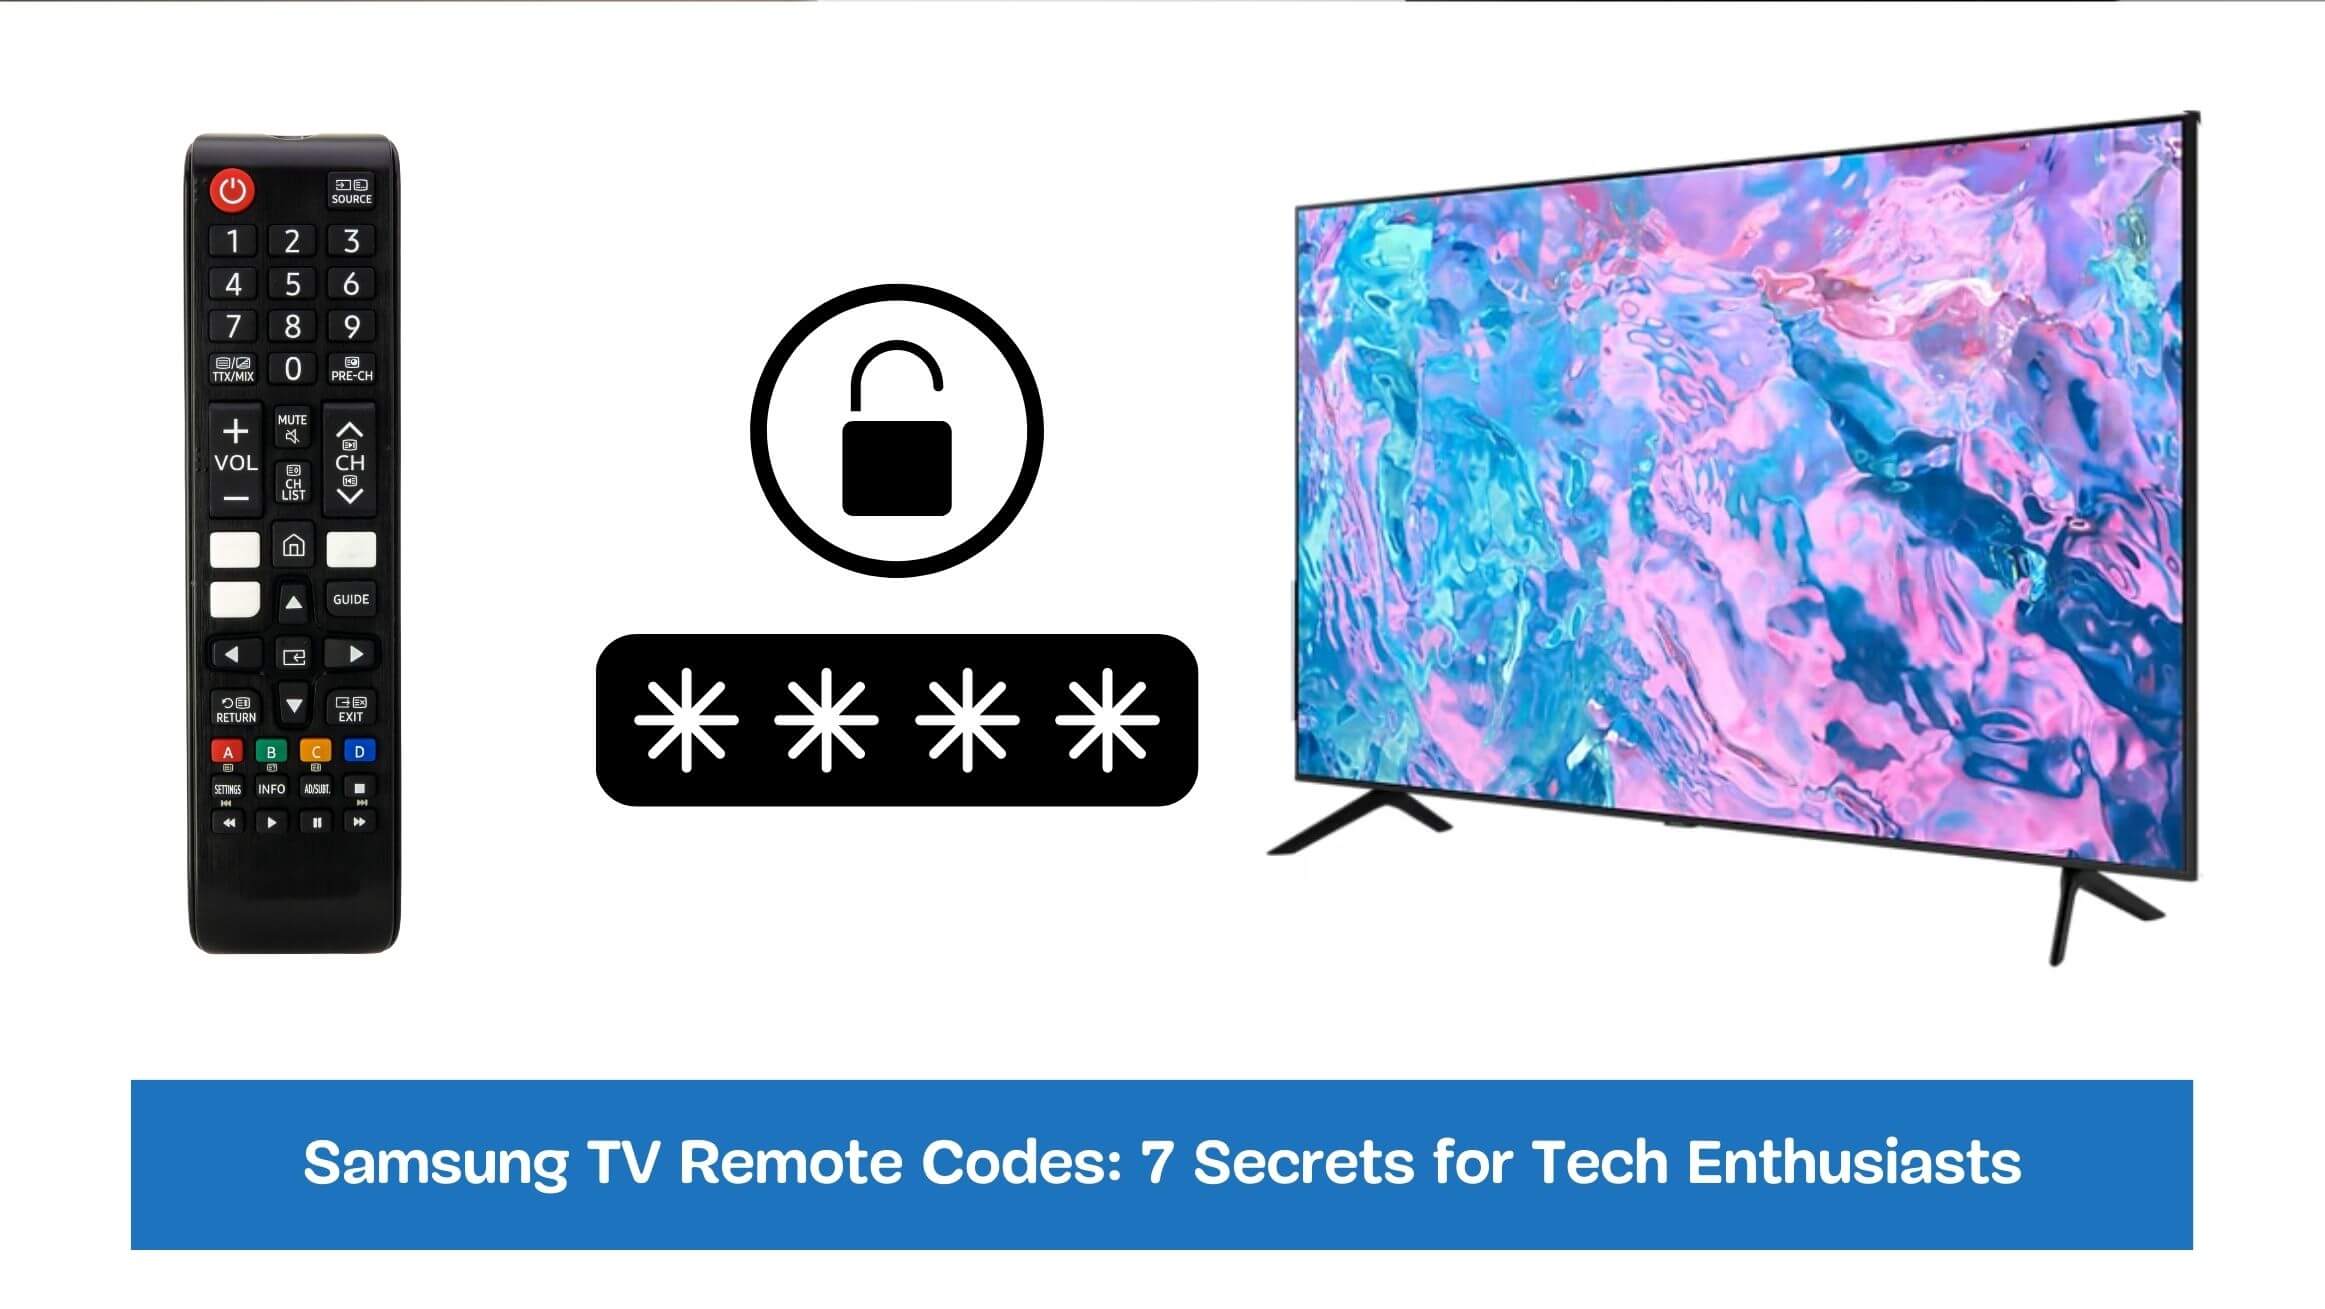 Samsung TV Remote Codes: 7 Secrets for Tech Enthusiasts